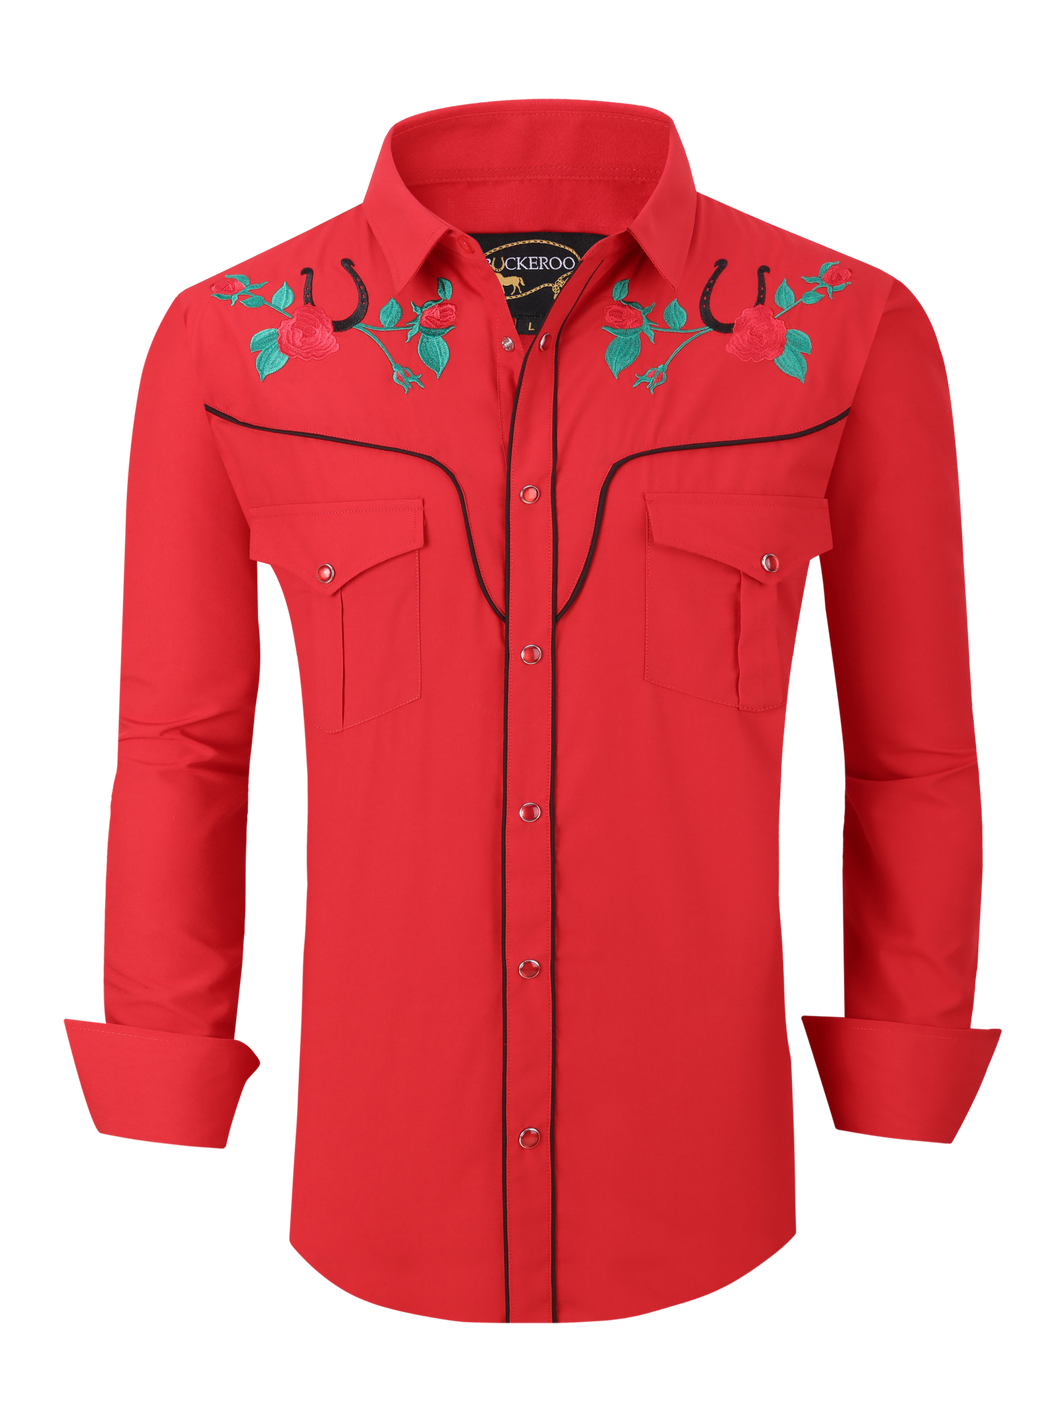 Mens RODEO WESTERN COUNTRY RED GREEN BLACK STITCH FLORAL LUCKY HORSESHOE TRIBAL Shirt Cowboy